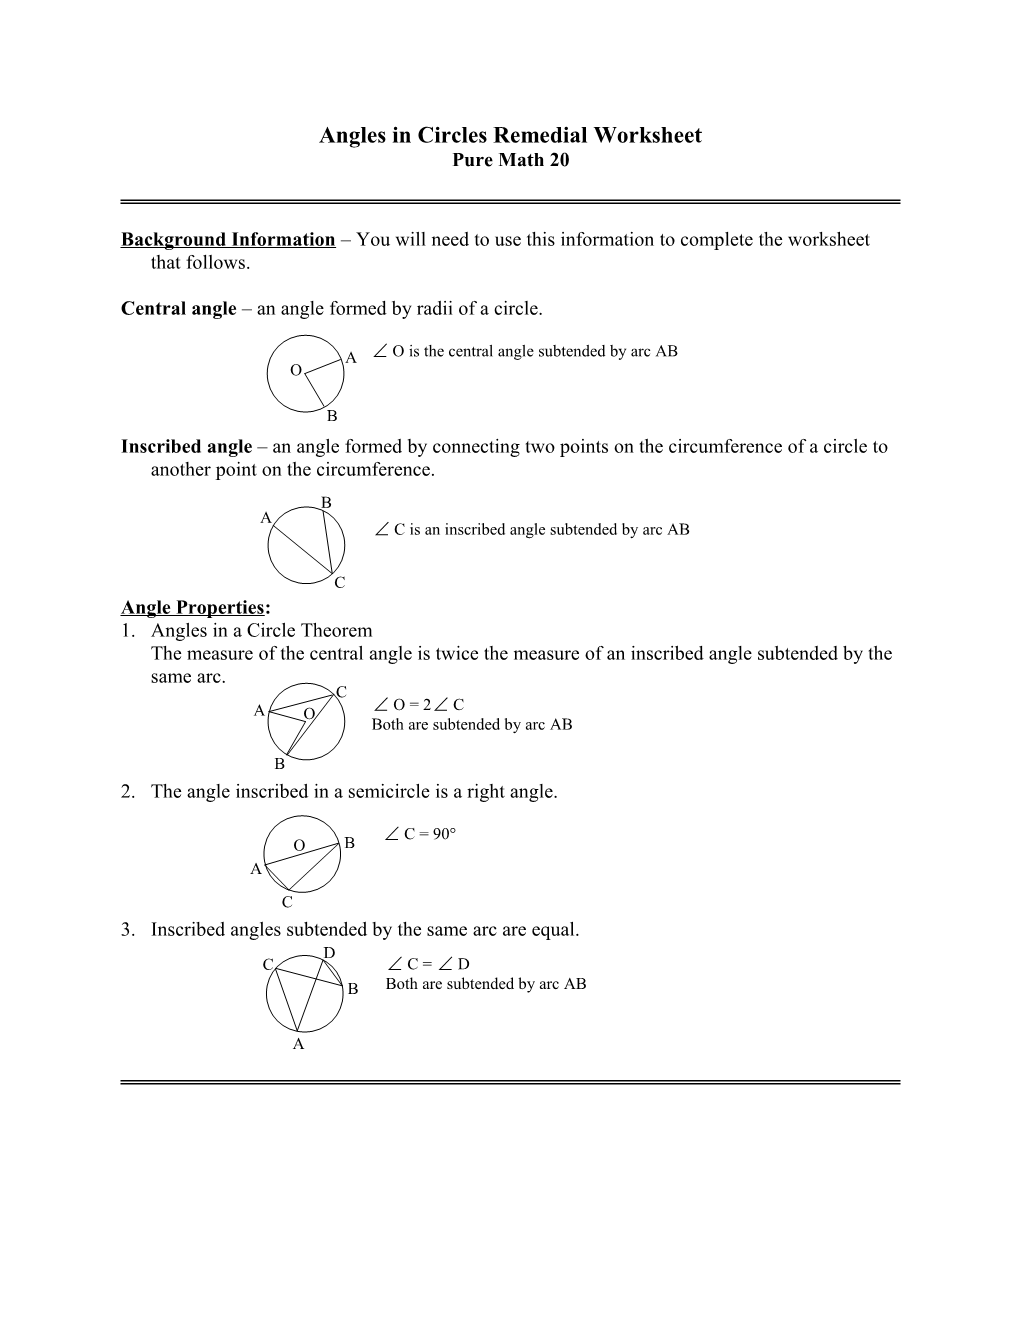 Angles in Circles Remedial Worksheet